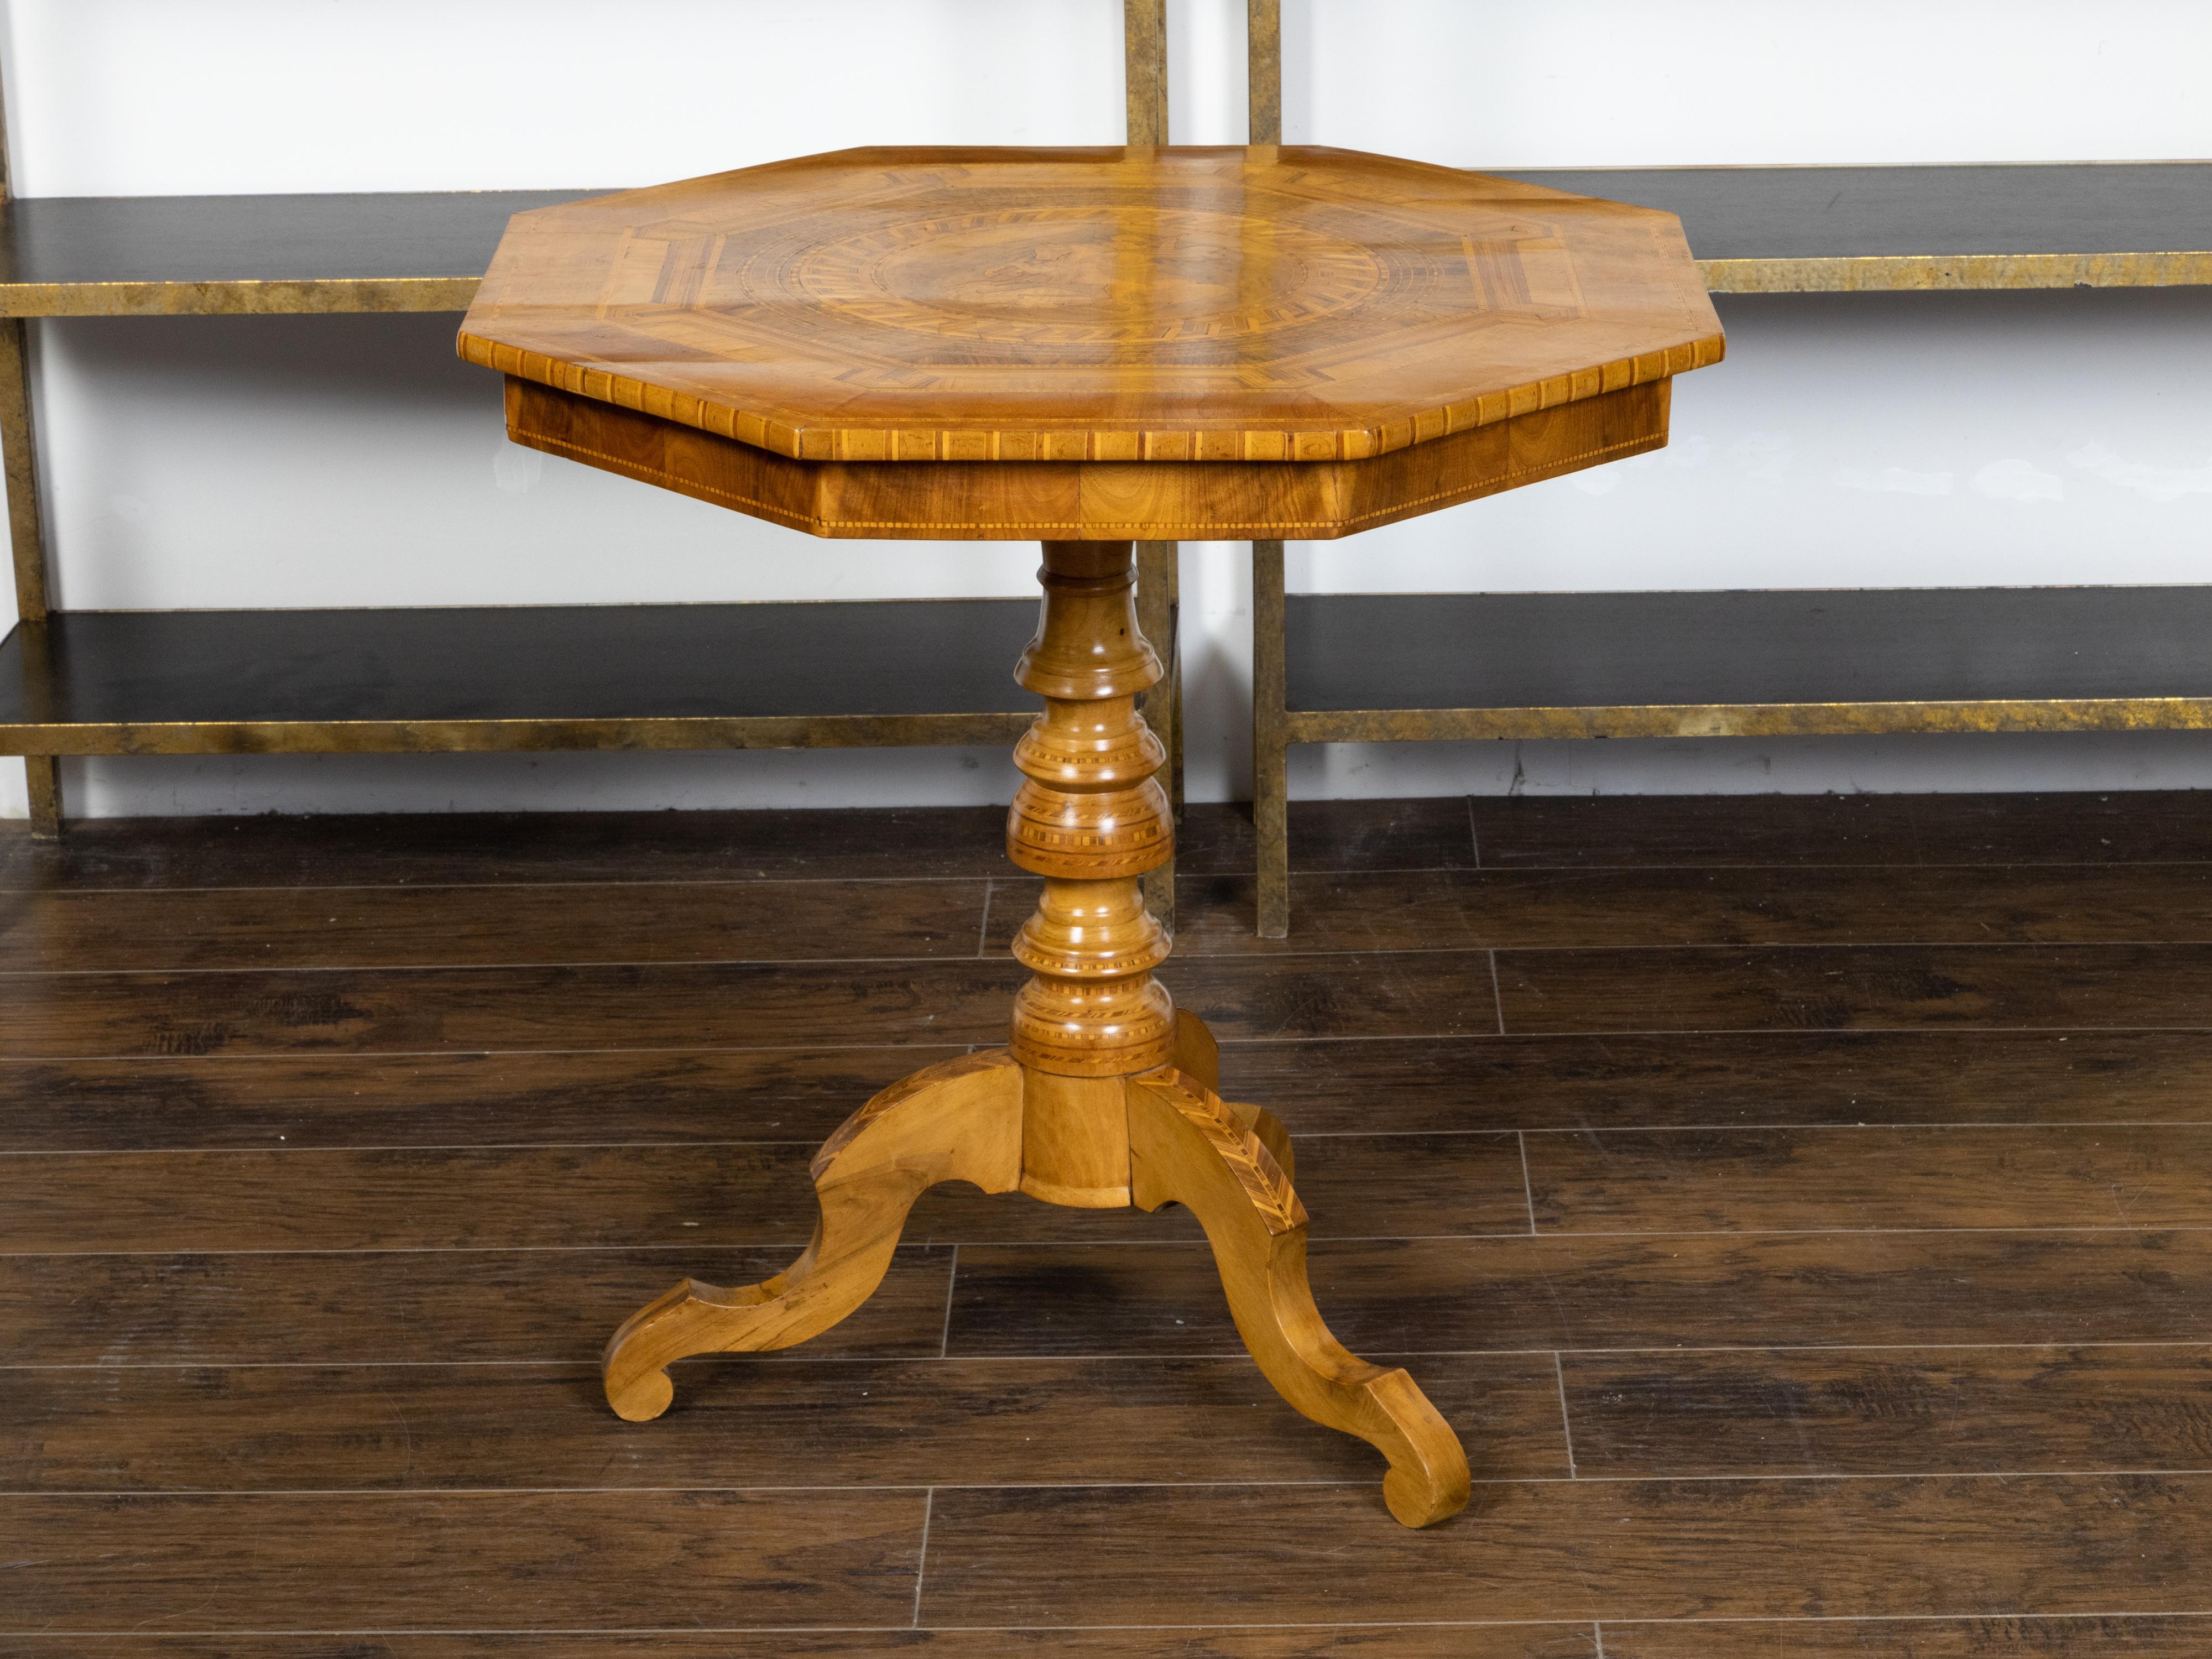 An Italian wooden pedestal side table from the 19th century with octagonal top and marquetry décor depicting Saint George and the Dragon. Created in Italy during the 19th century, this exquisite side table features an octagonal top adorned with a